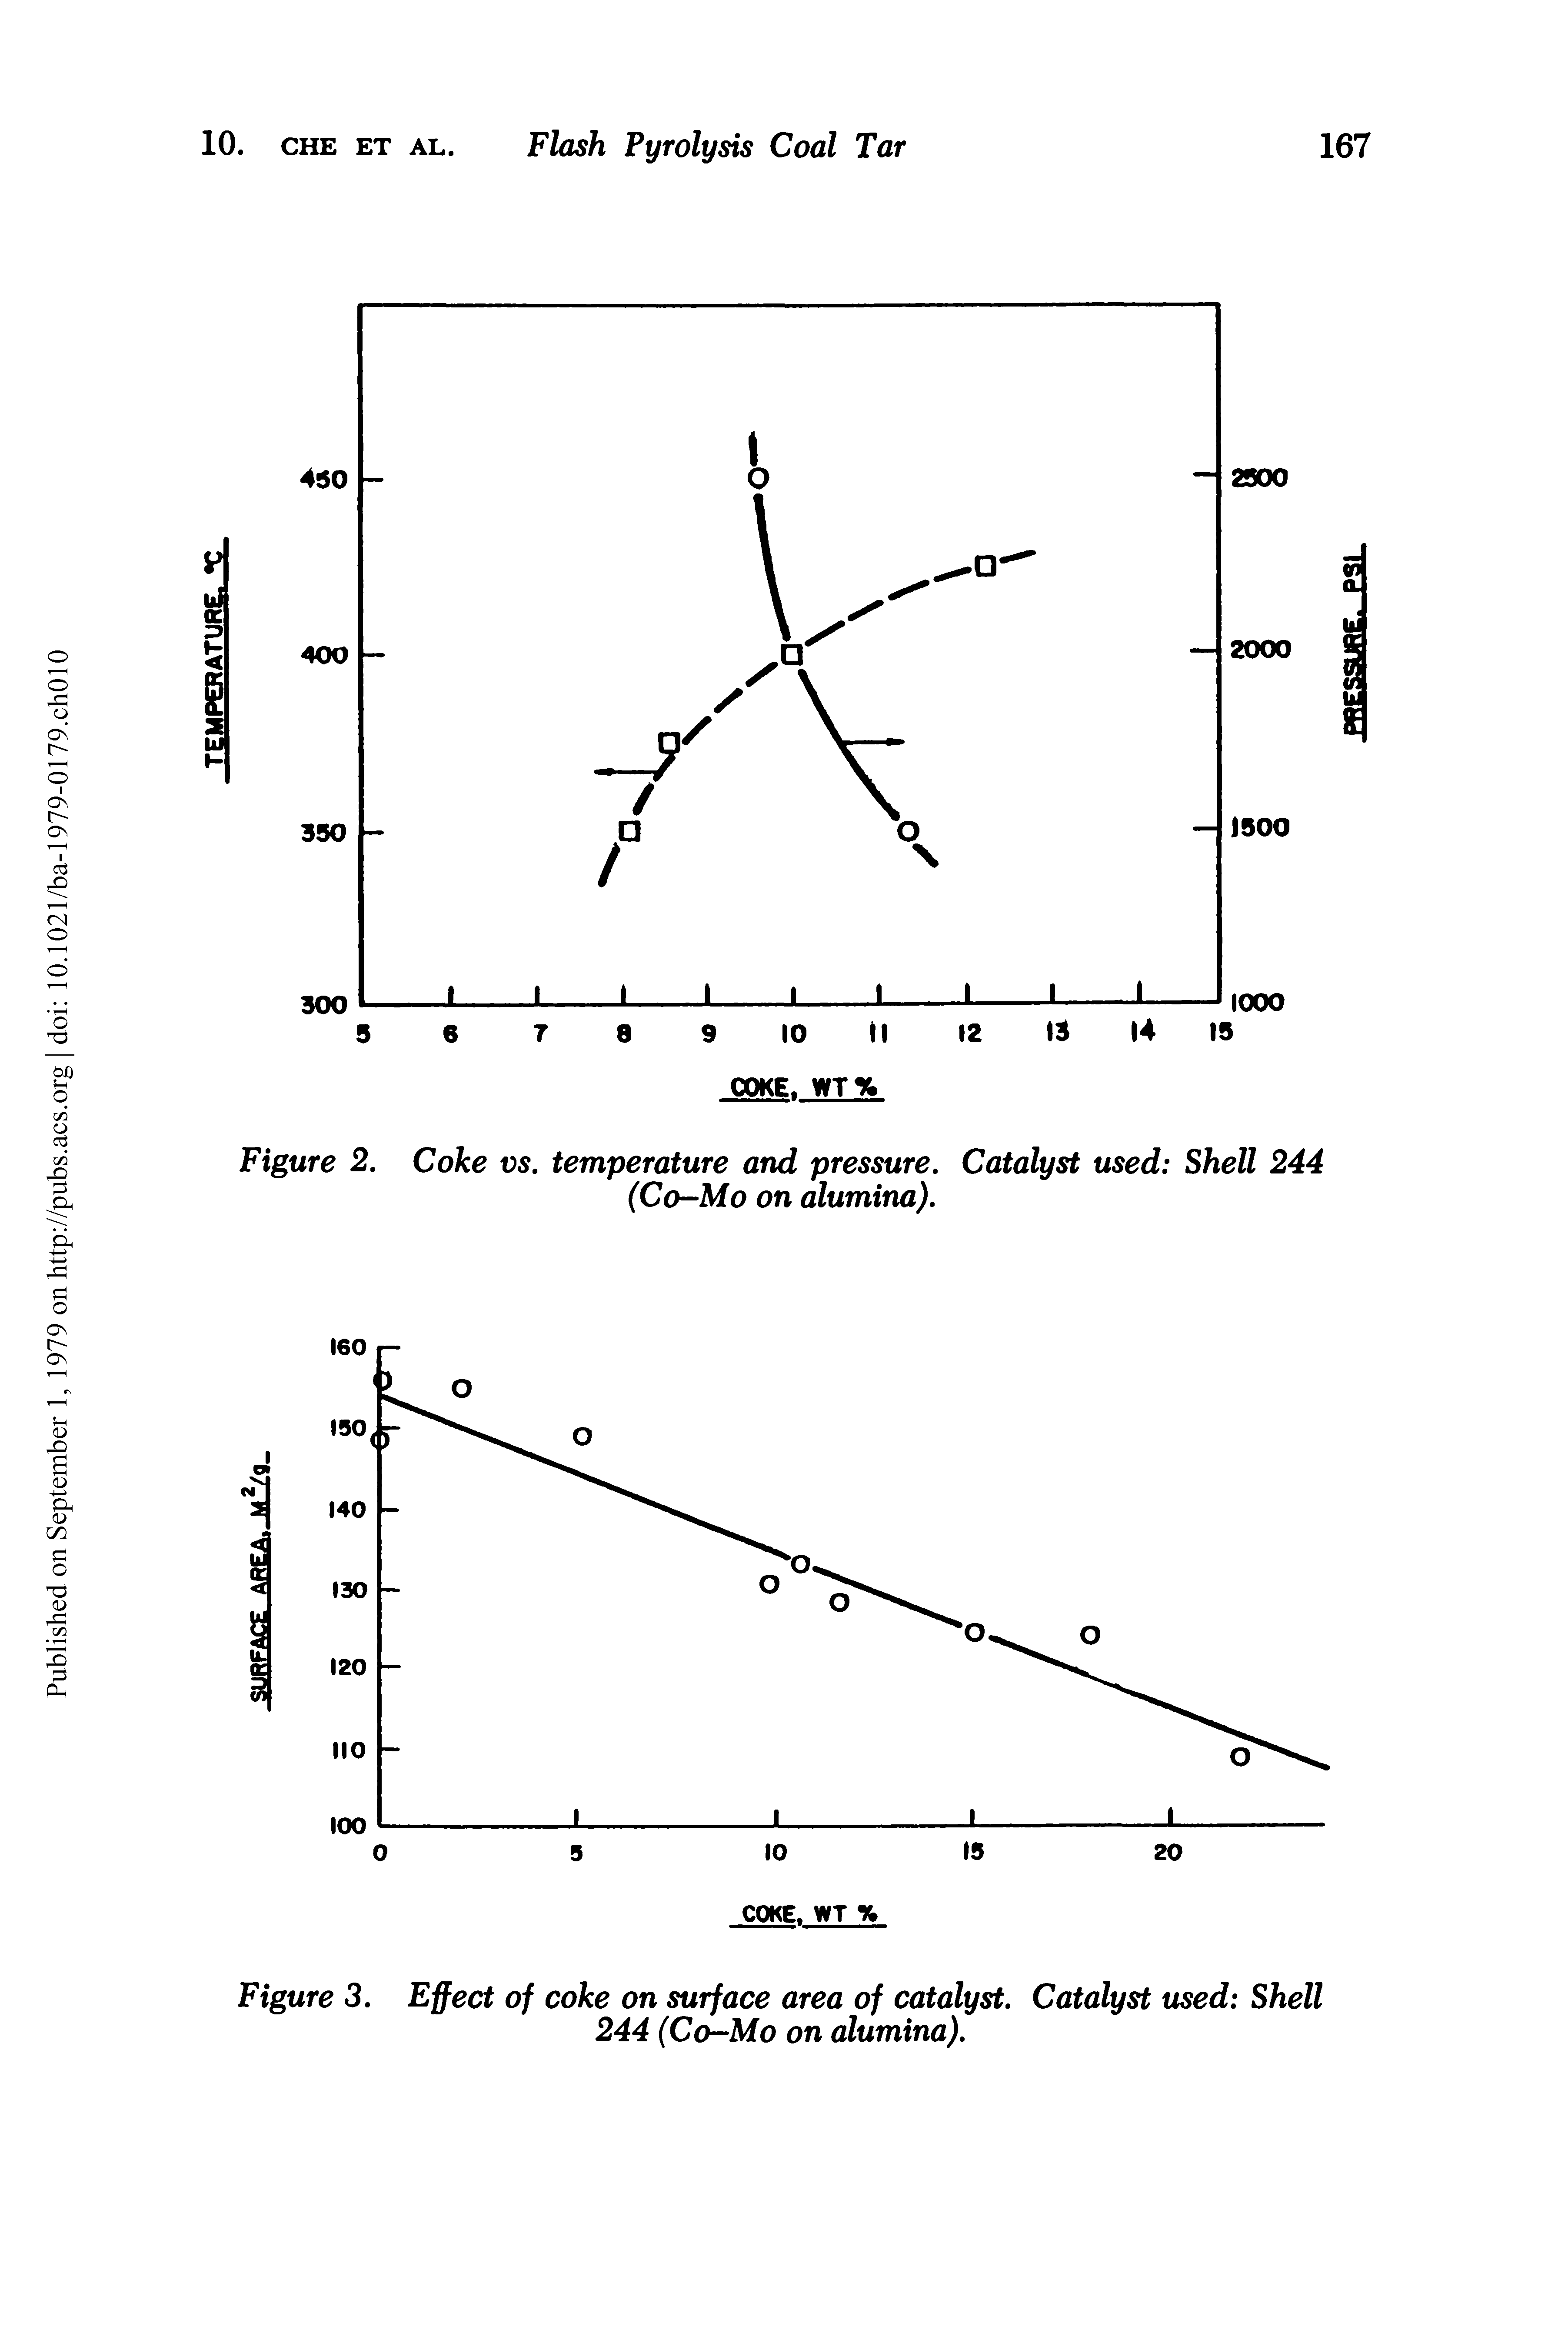 Figure 3. Effect of coke on surface area of catalyst. Catalyst used Shell 244 (Co-Mo on alumina).